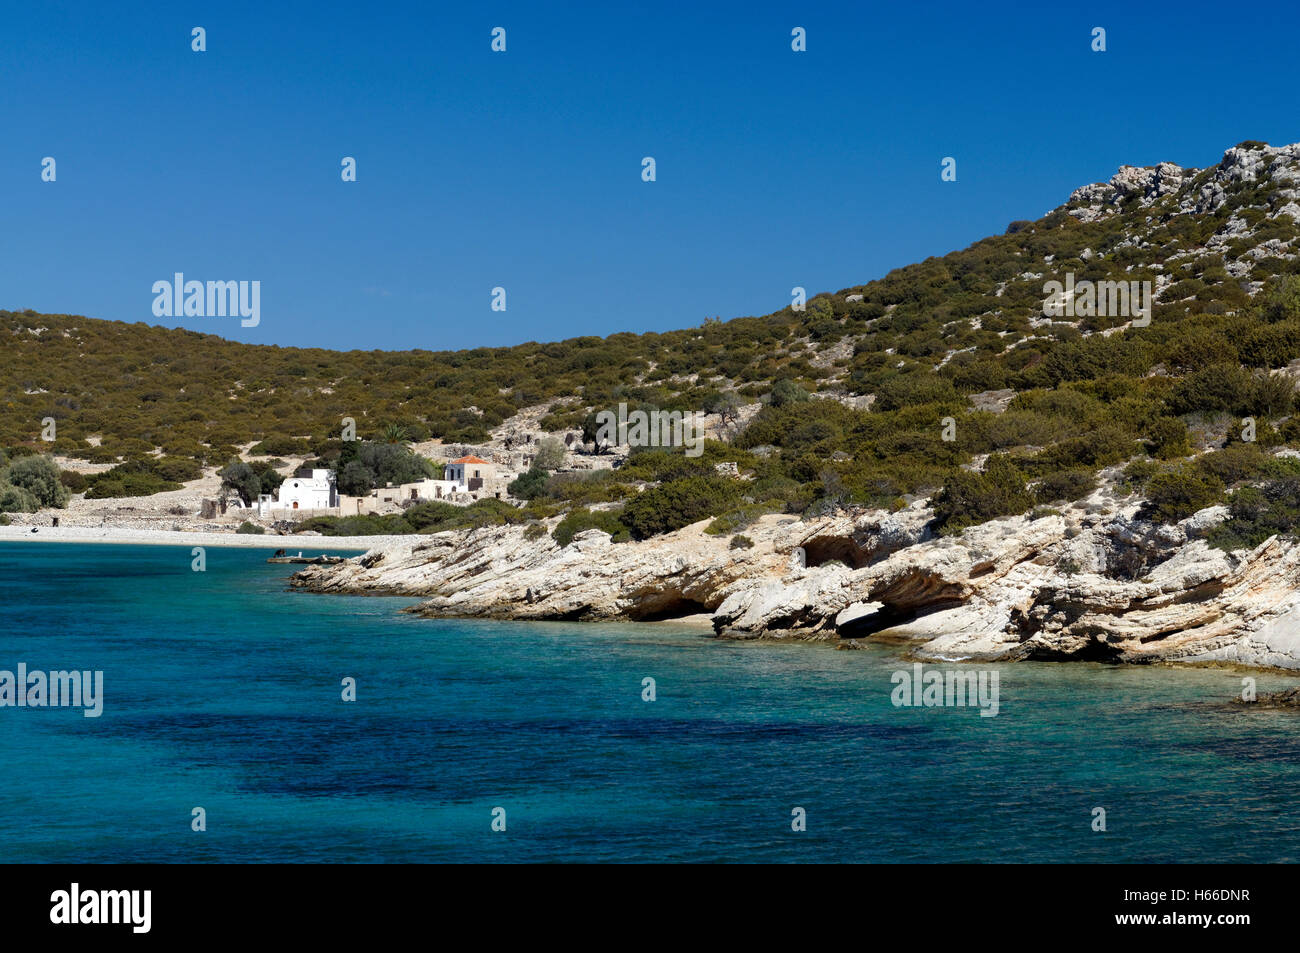 St Georges Bay and abandoned village, Alimnia Island near Rhodes, Dodecanese Islands, Greece. Stock Photo